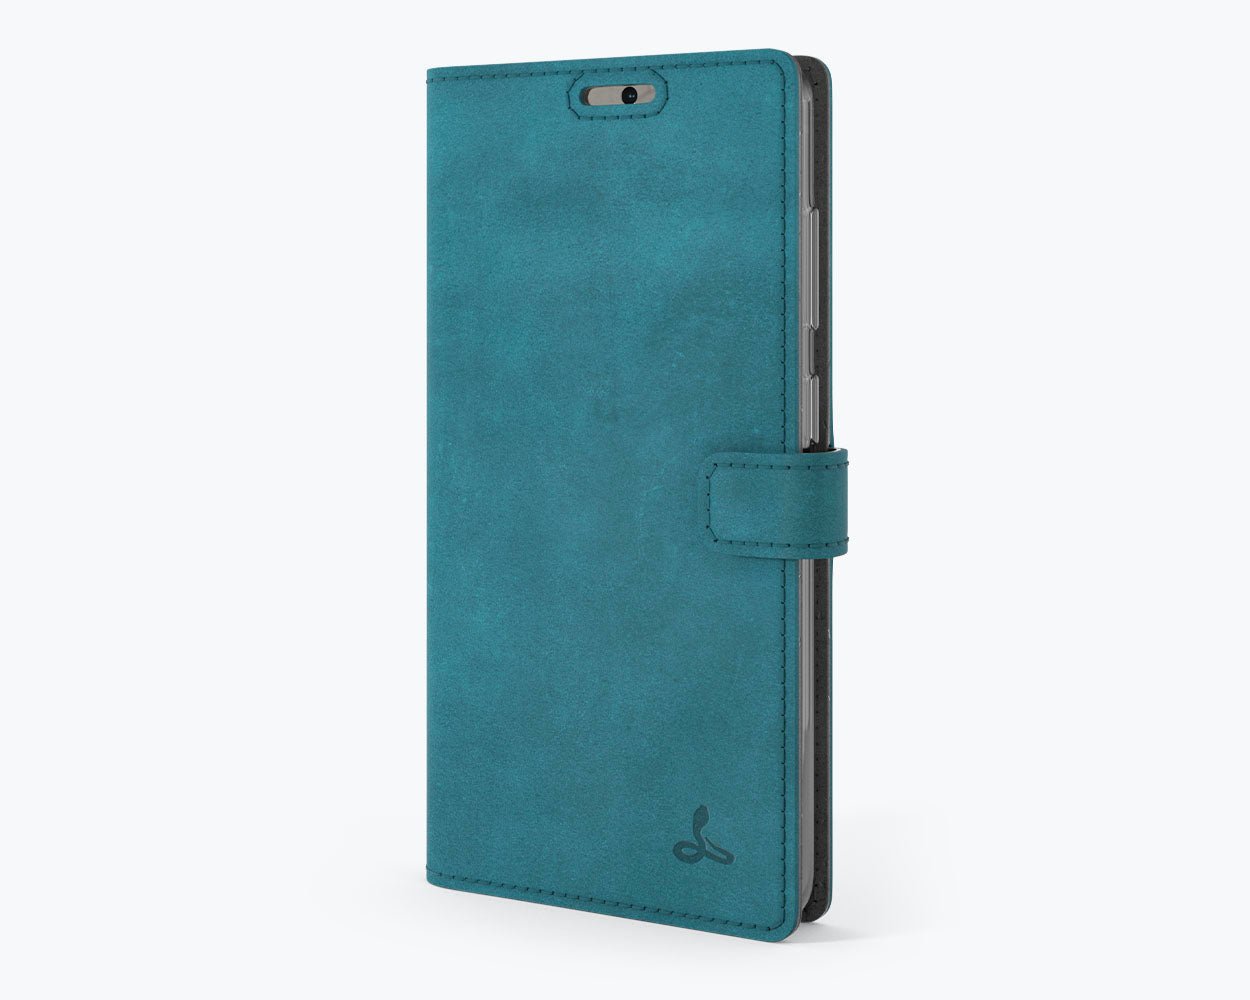 Samsung Galaxy S20 FE - Vintage Leather Wallet (Almost Perfect) Teal - Snakehive UK